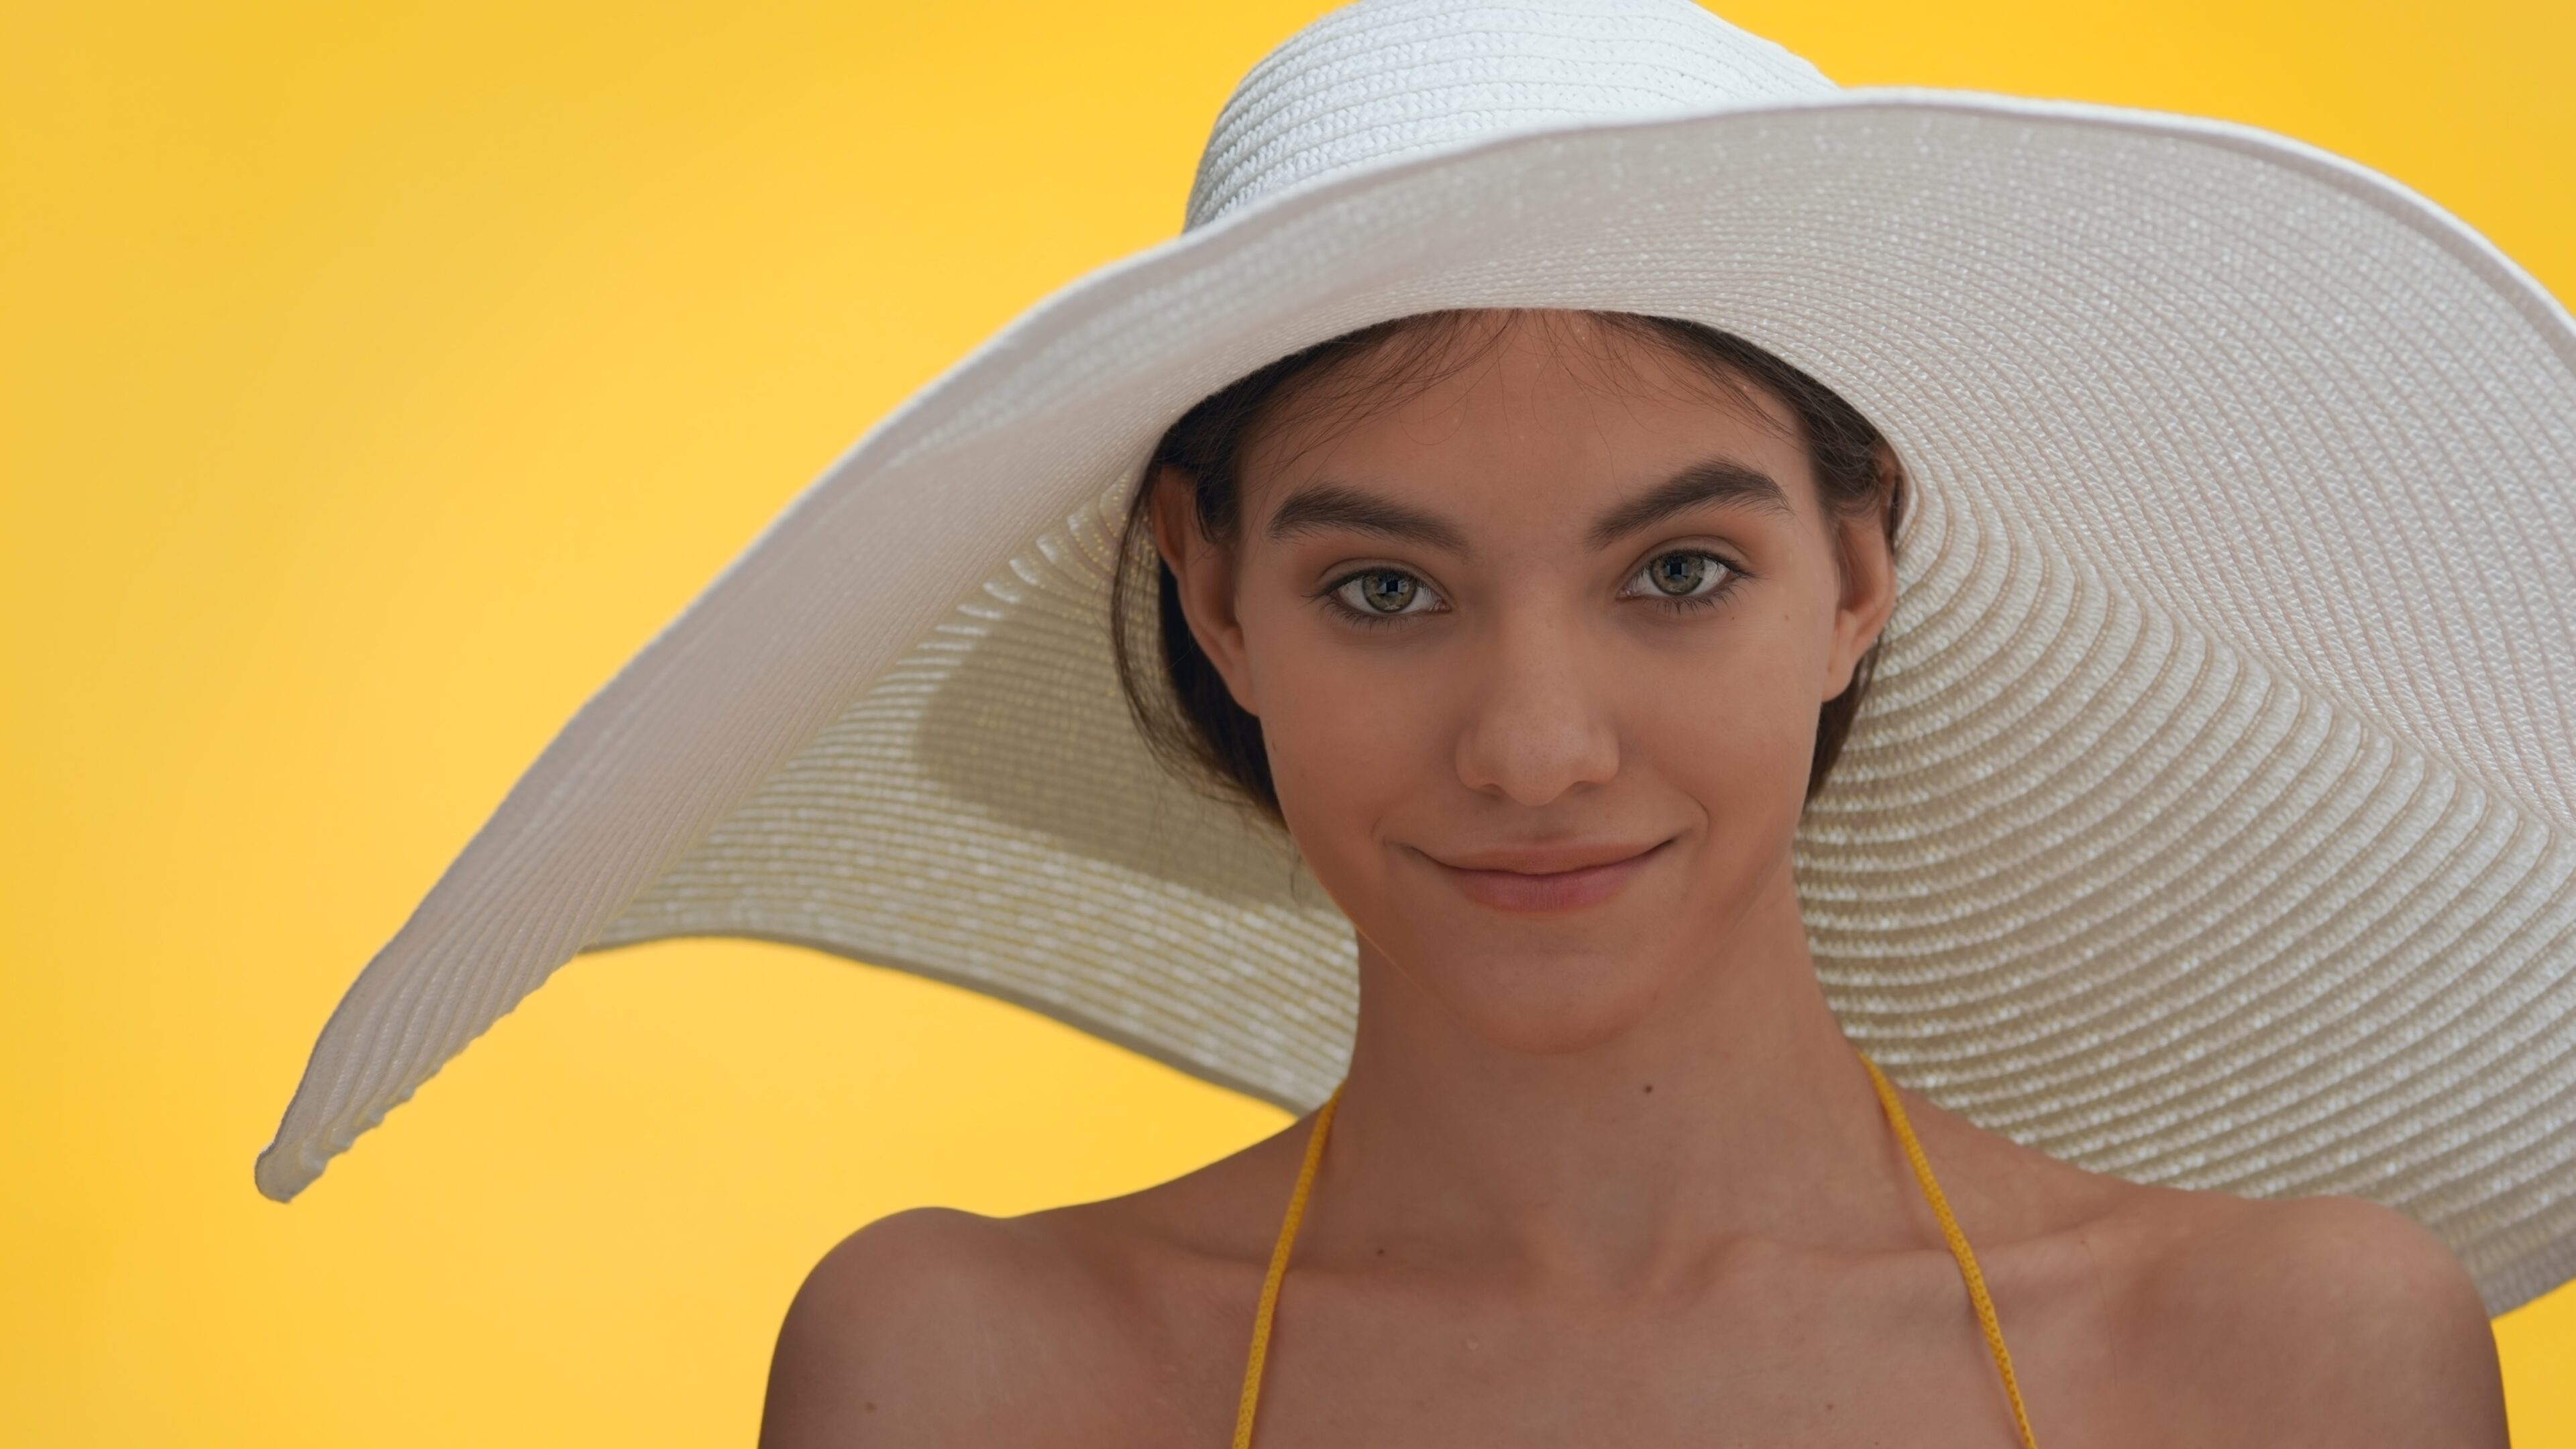 The girl wears a hat to protect her hair from the sun